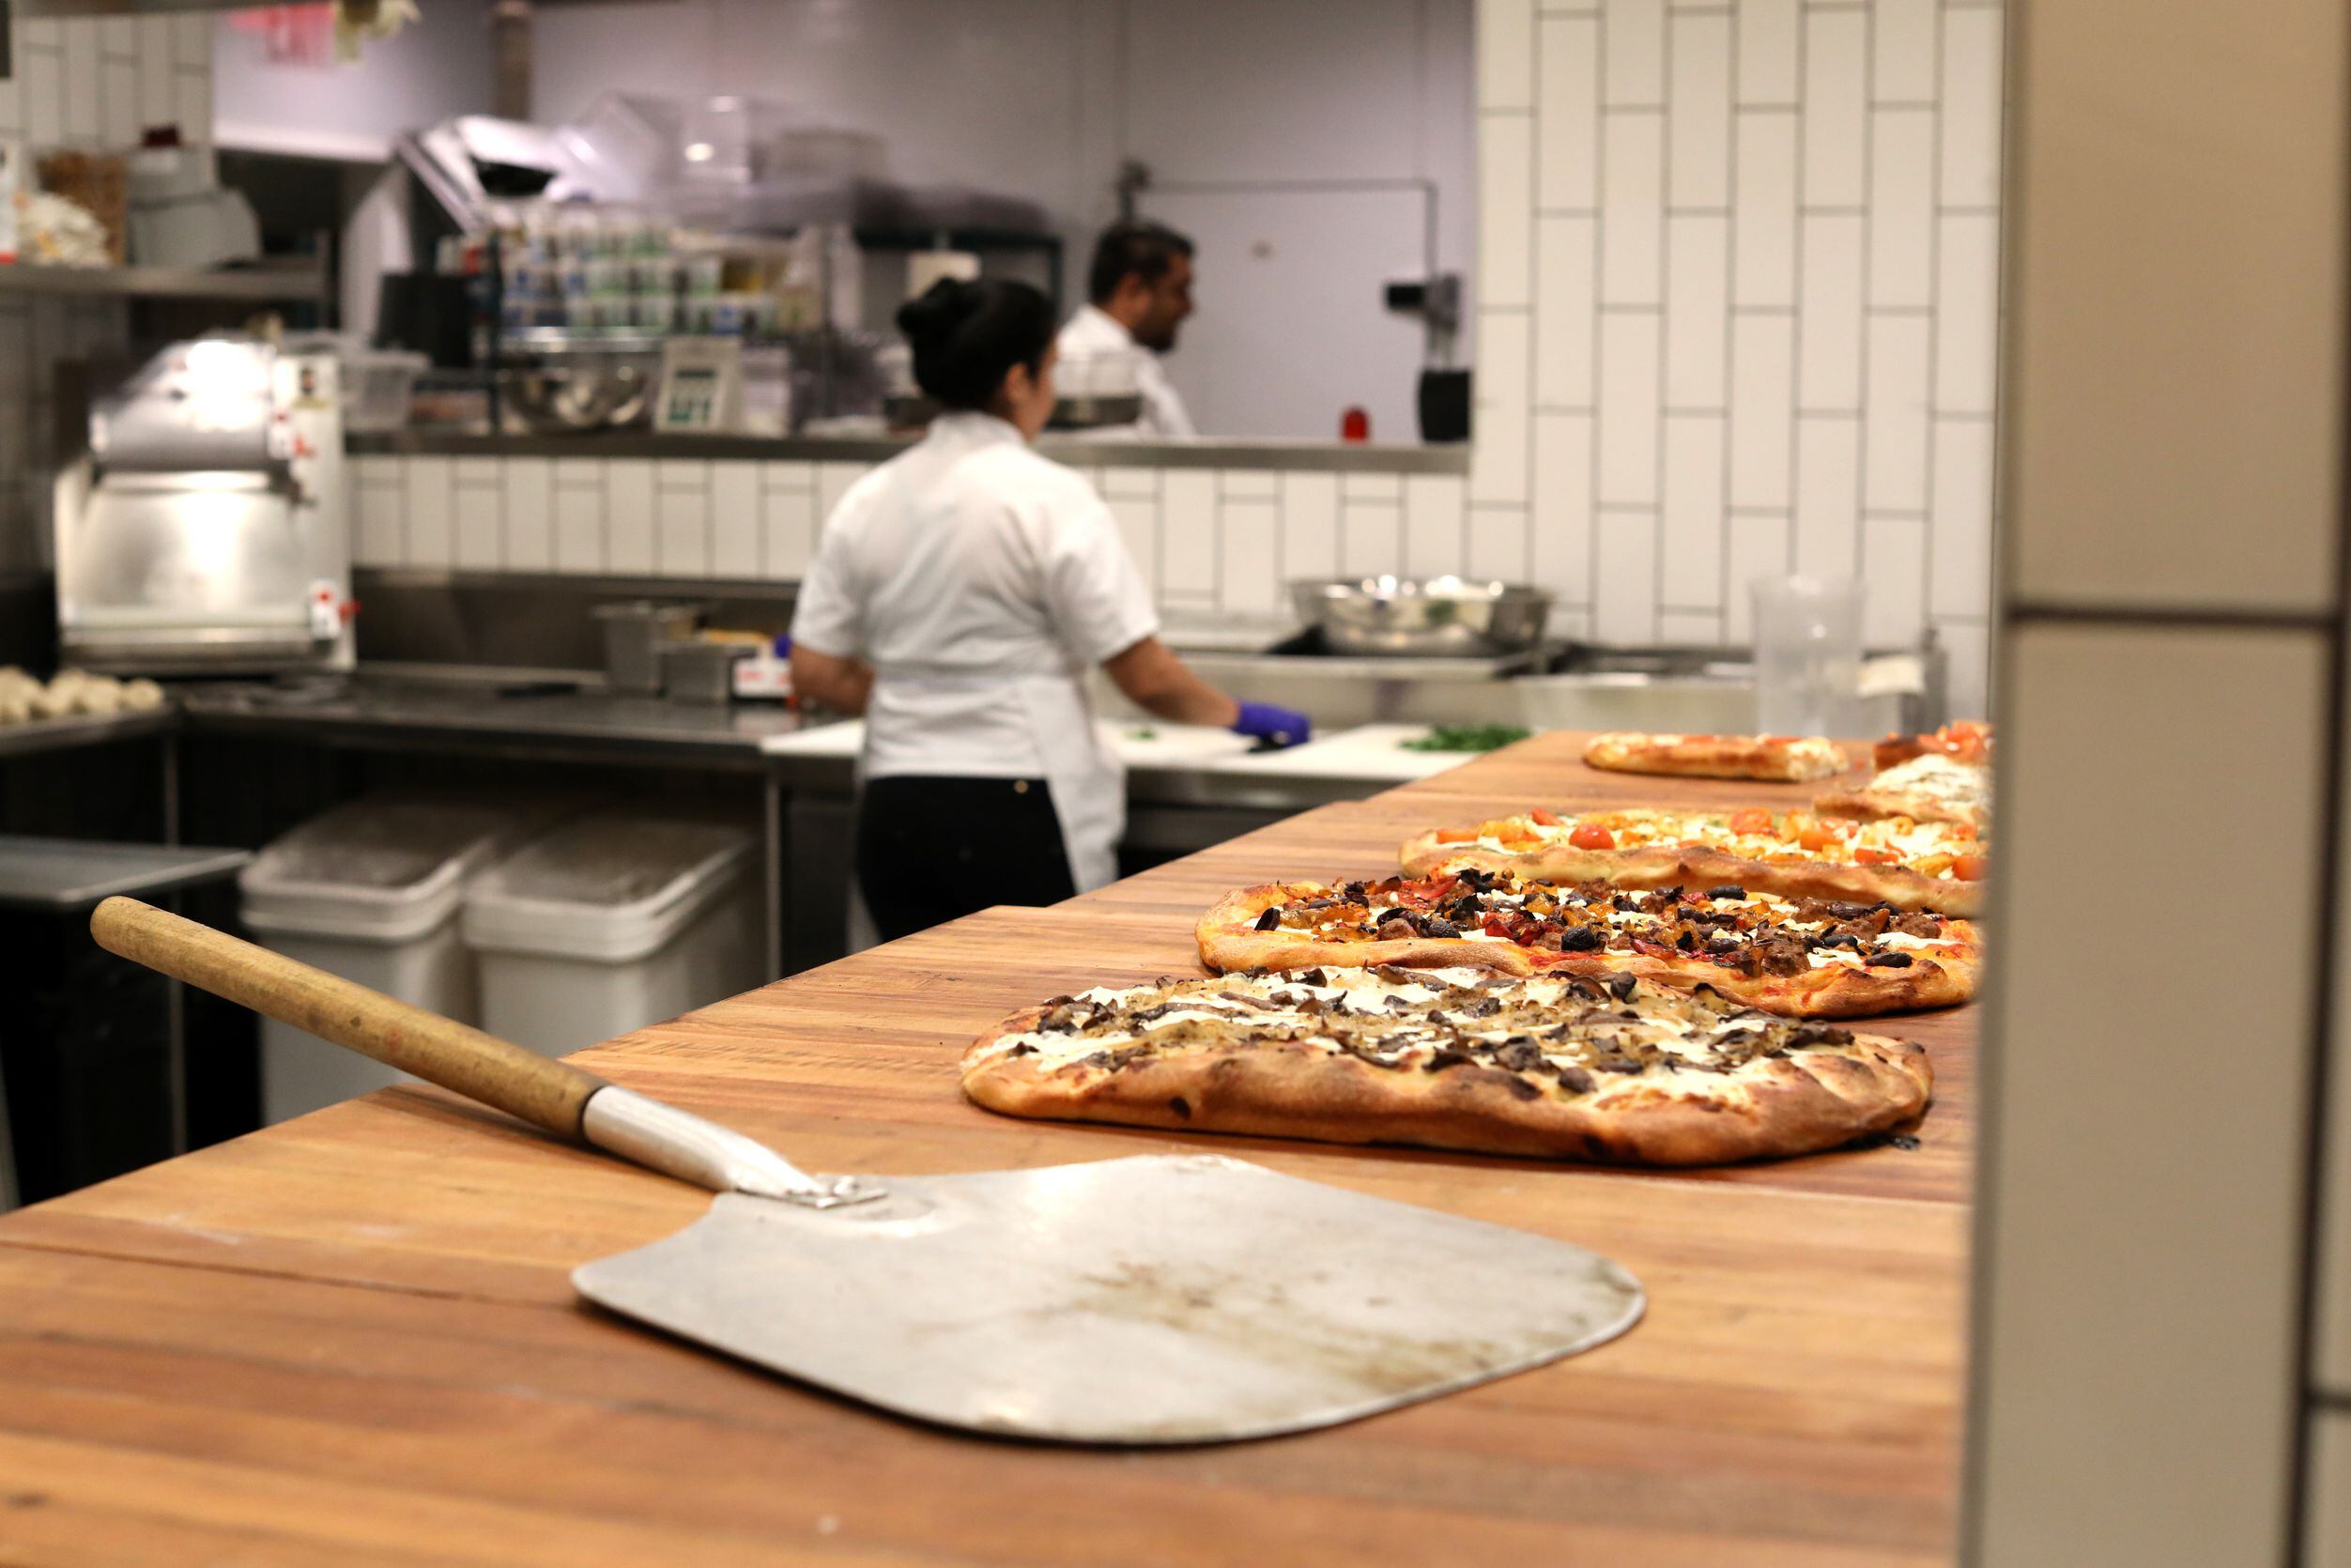 Pizzas are ready to be cut at Darna in Plano.